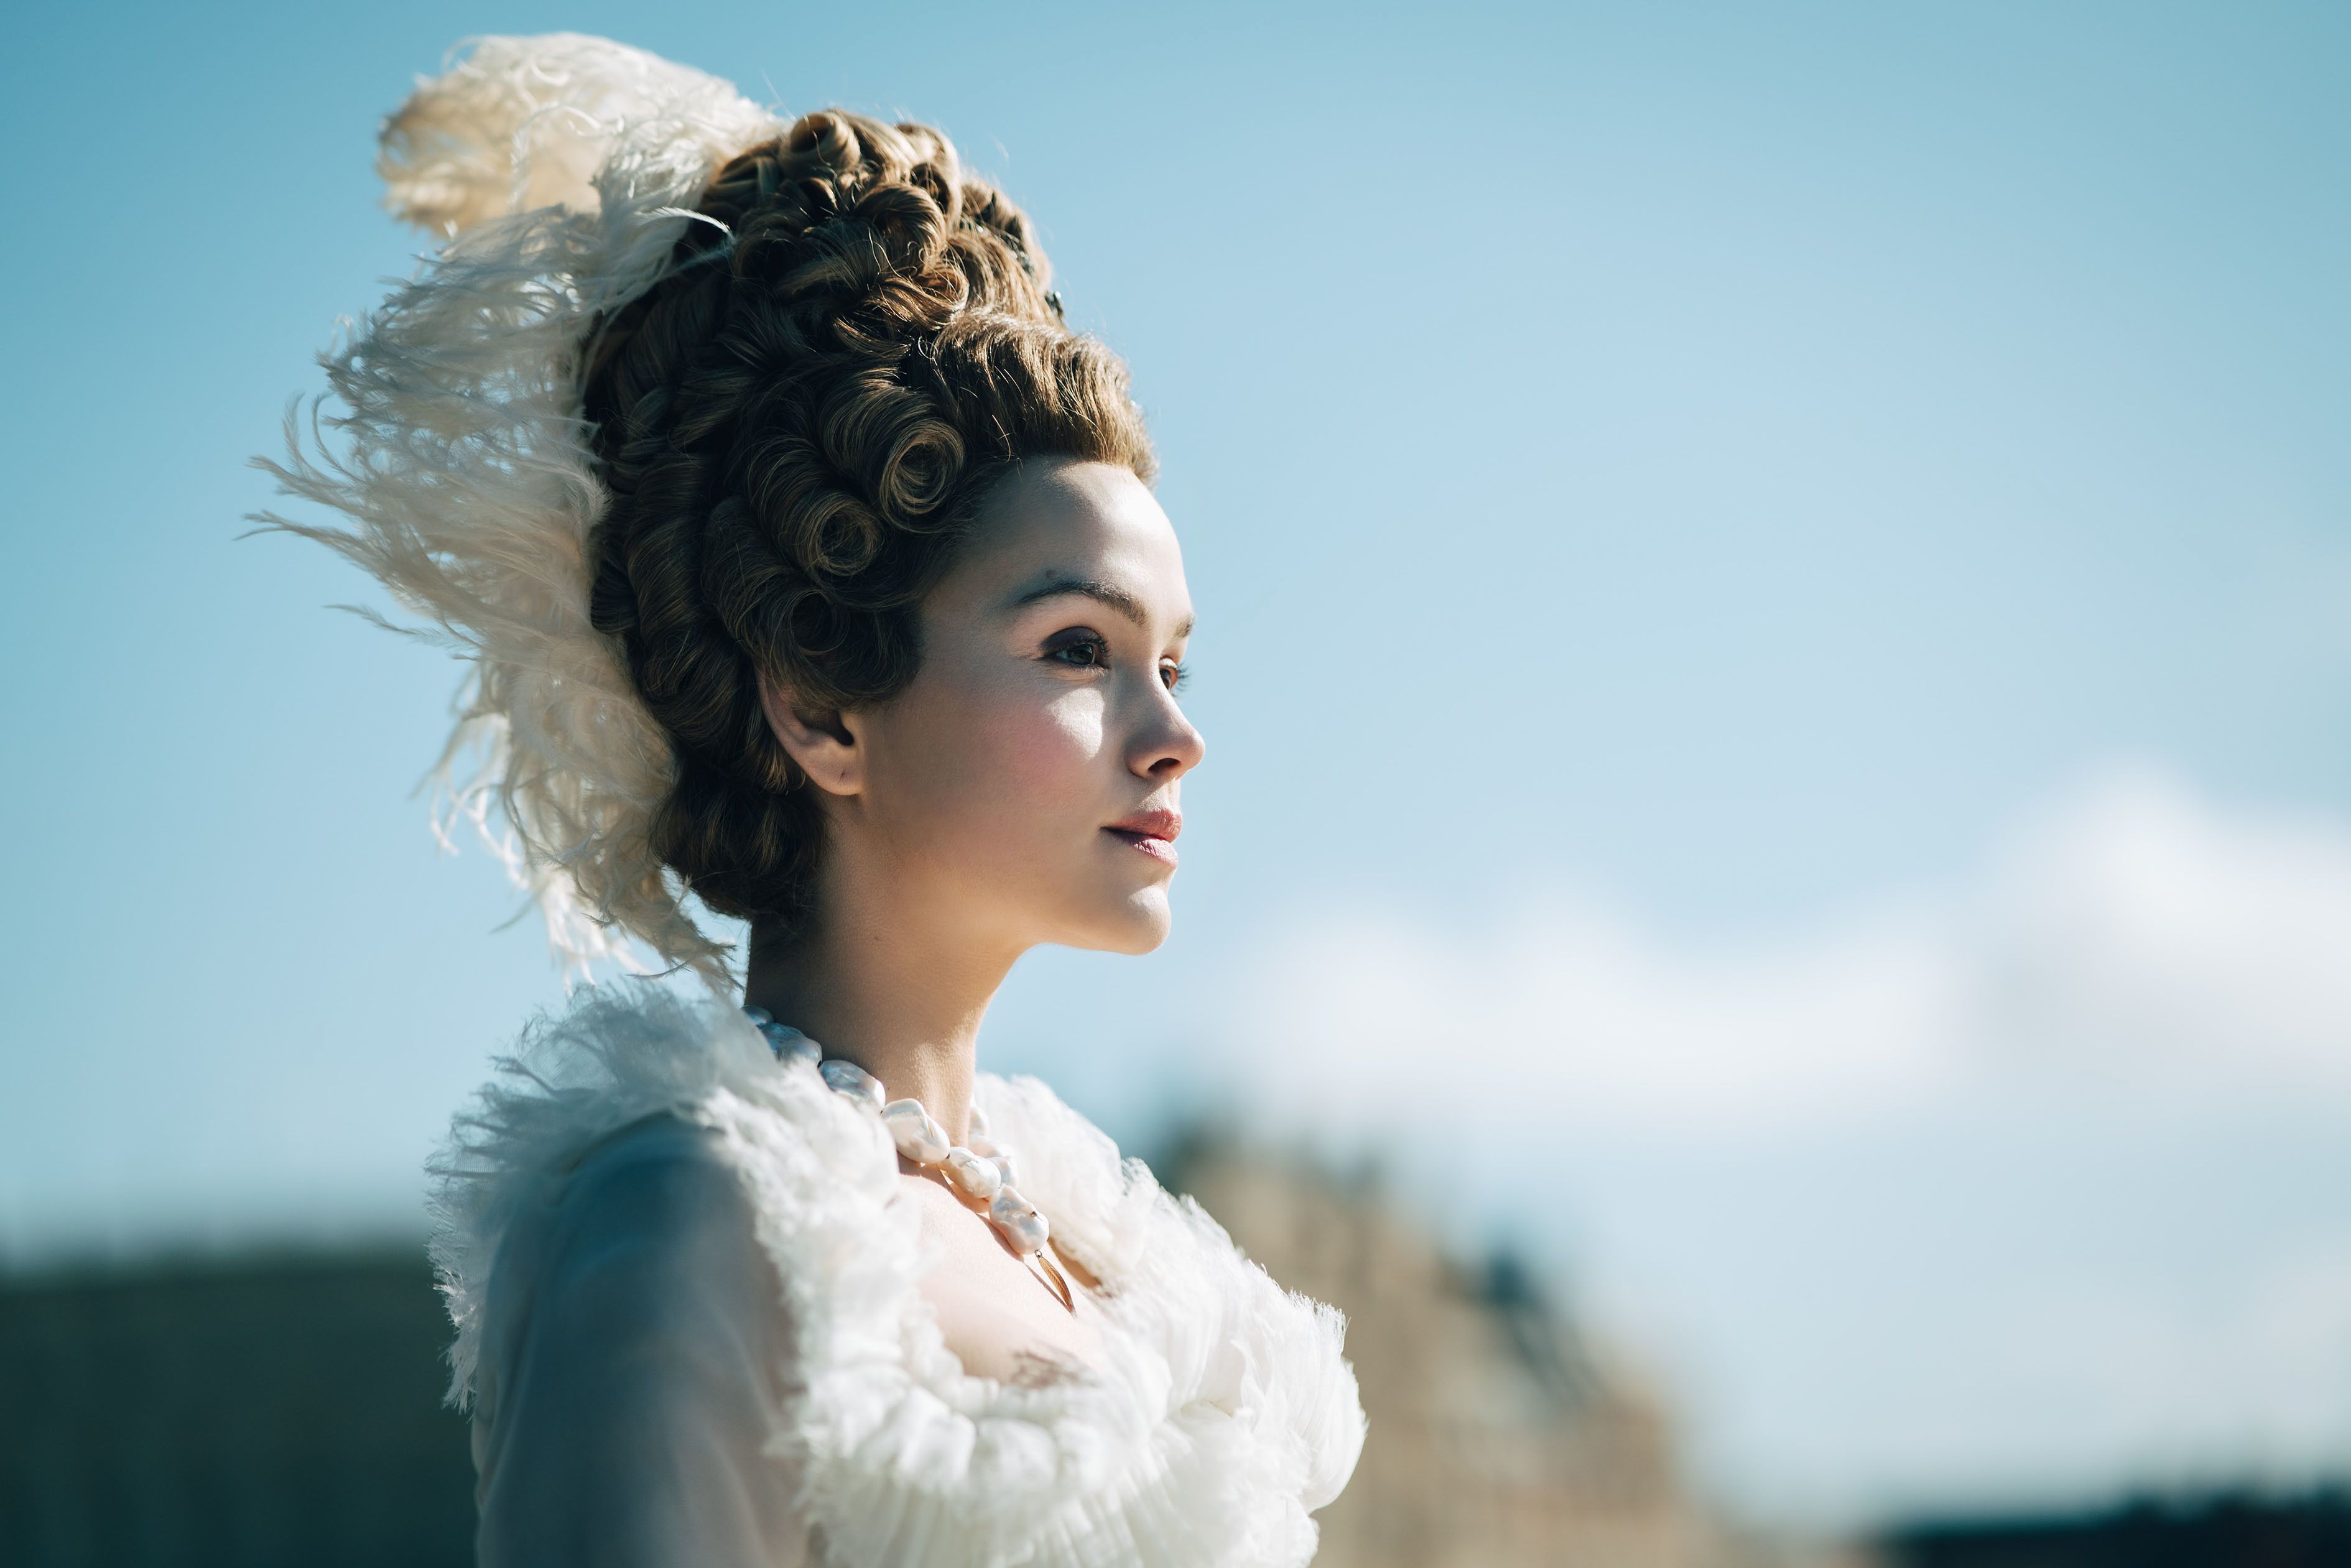 Marie Antoinette: New BBC series set to feature sapphic plot